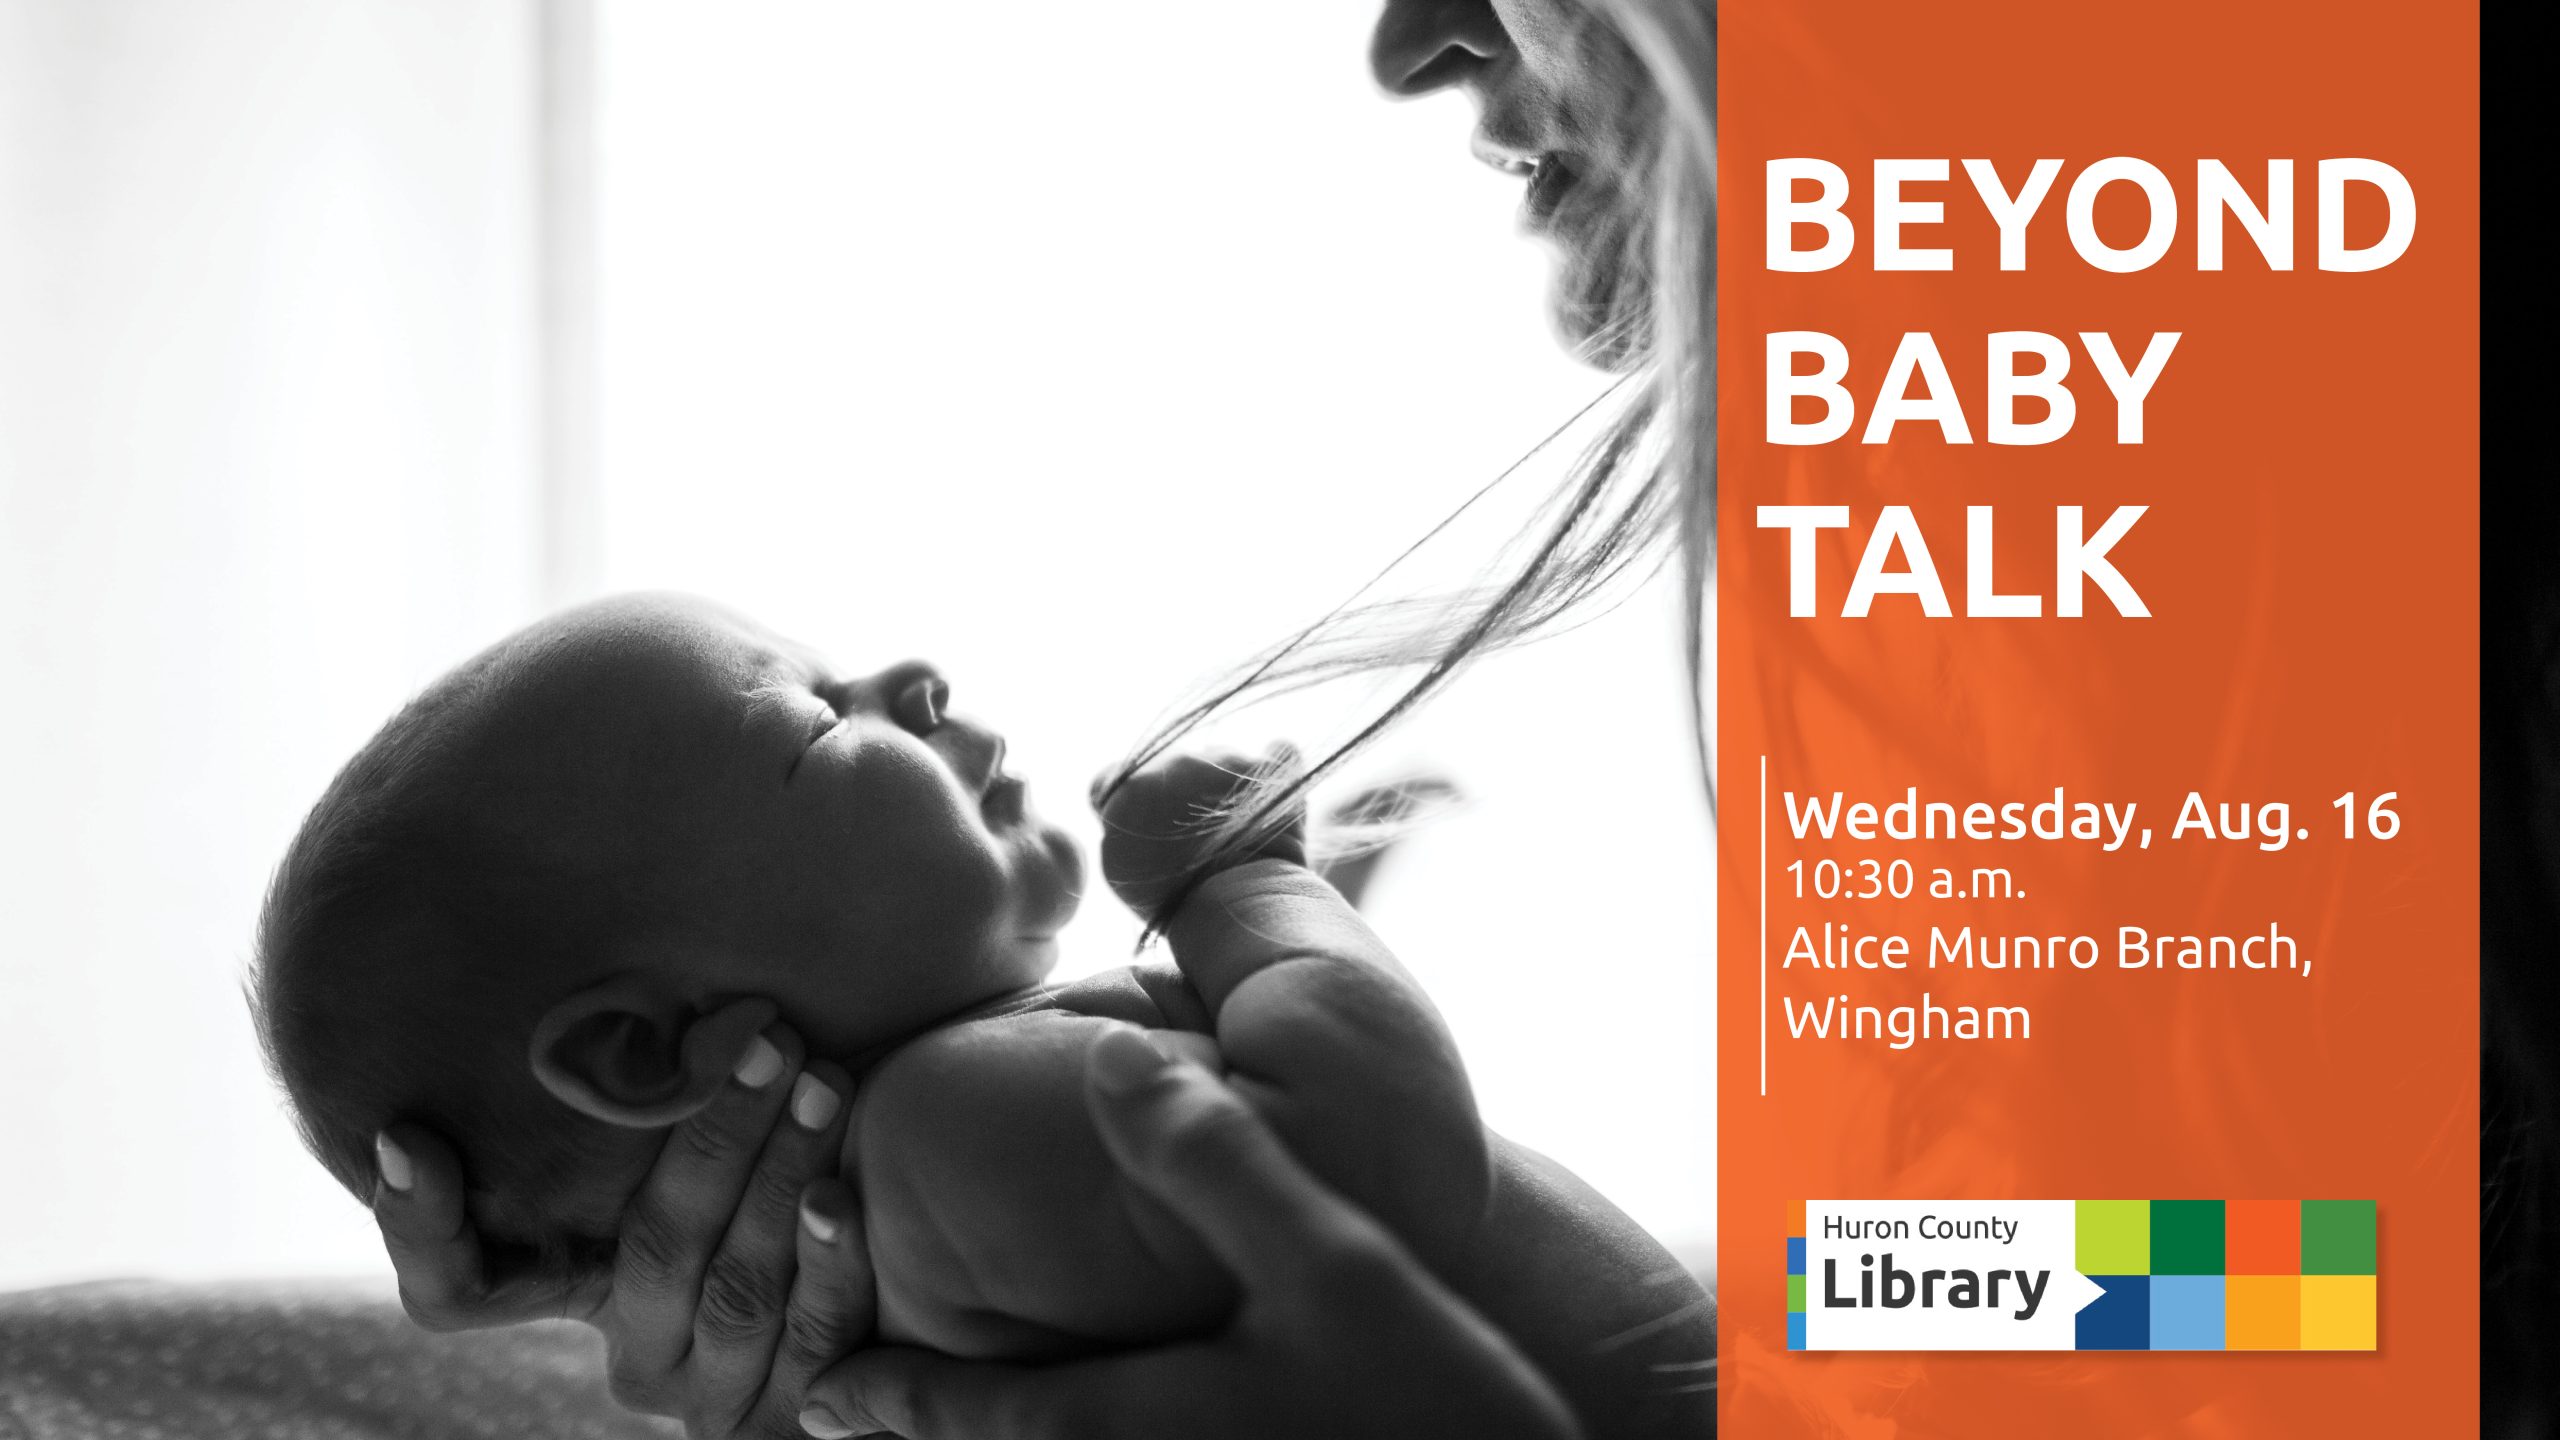 Black and white photo of a mom talking to a baby with text promoting Beyond Baby Talk at Alice Munro Branch